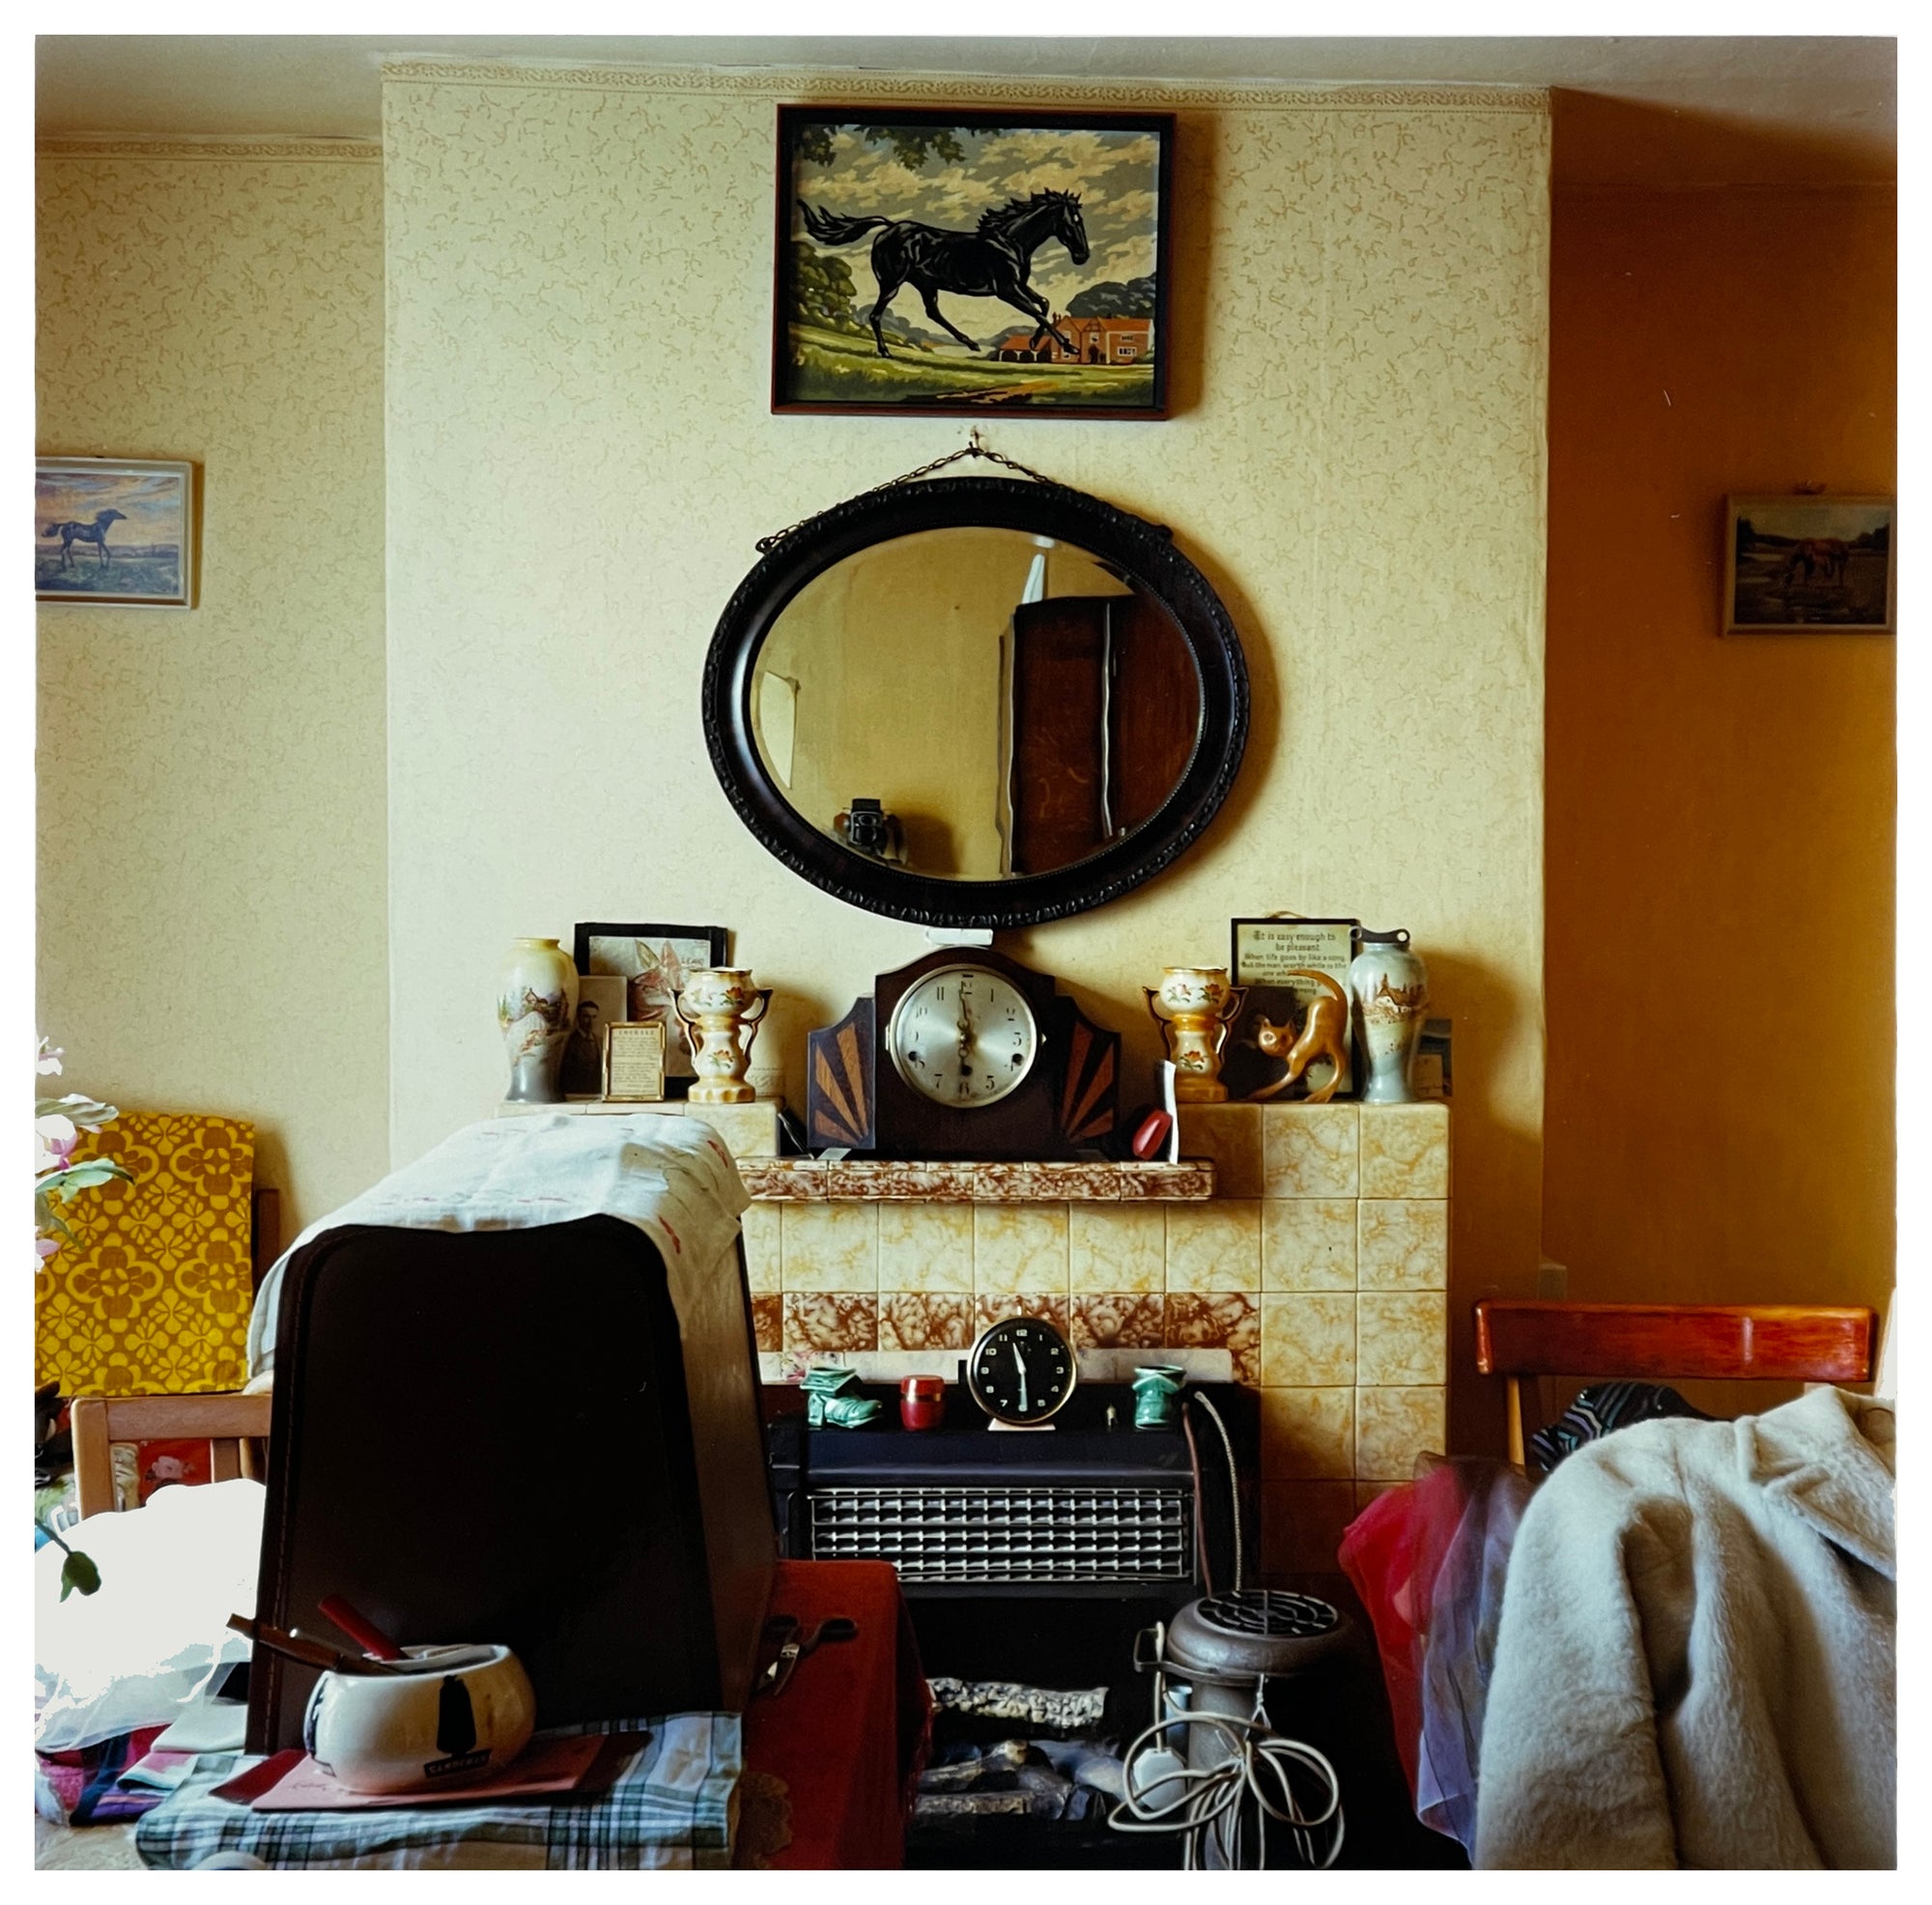 Photograph by Richard Heeps. A mantelpiece is in the middle of this photograph with an electric fire sitting in its hearth. The mantelpiece is surrounded and covered by paraphernalia. Above the mantelpiece is a mirror and above that a picture of a black horse. There is a boxed sewing machine in front of the mantelpiece.